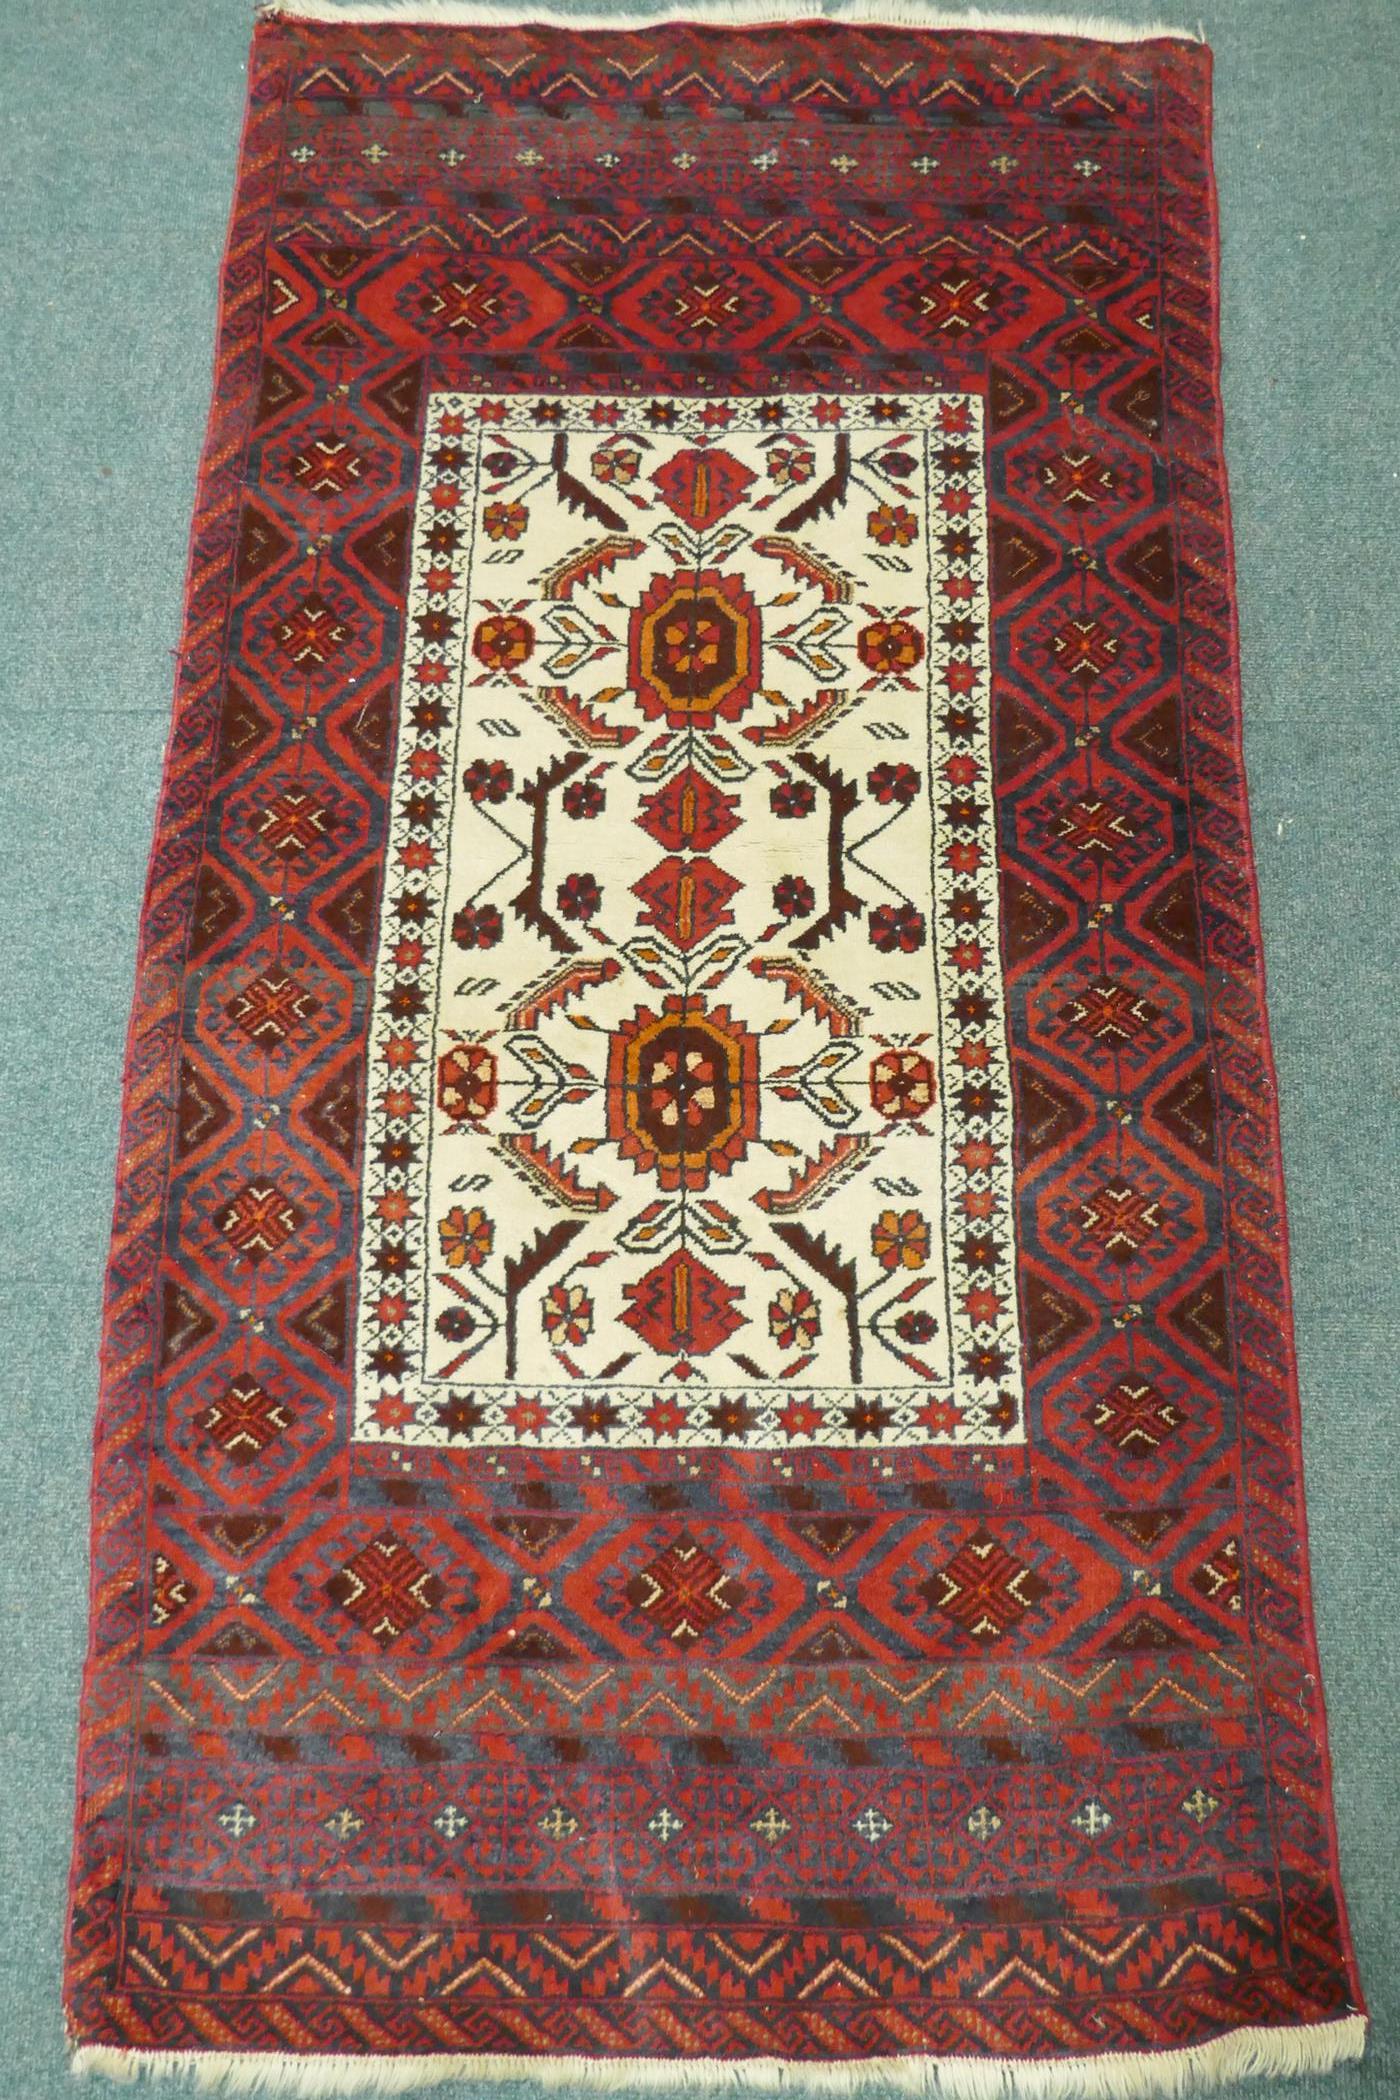 A Middle Eastern hand woven rug with red borders and central panel, with geometric floral designs - Image 2 of 3